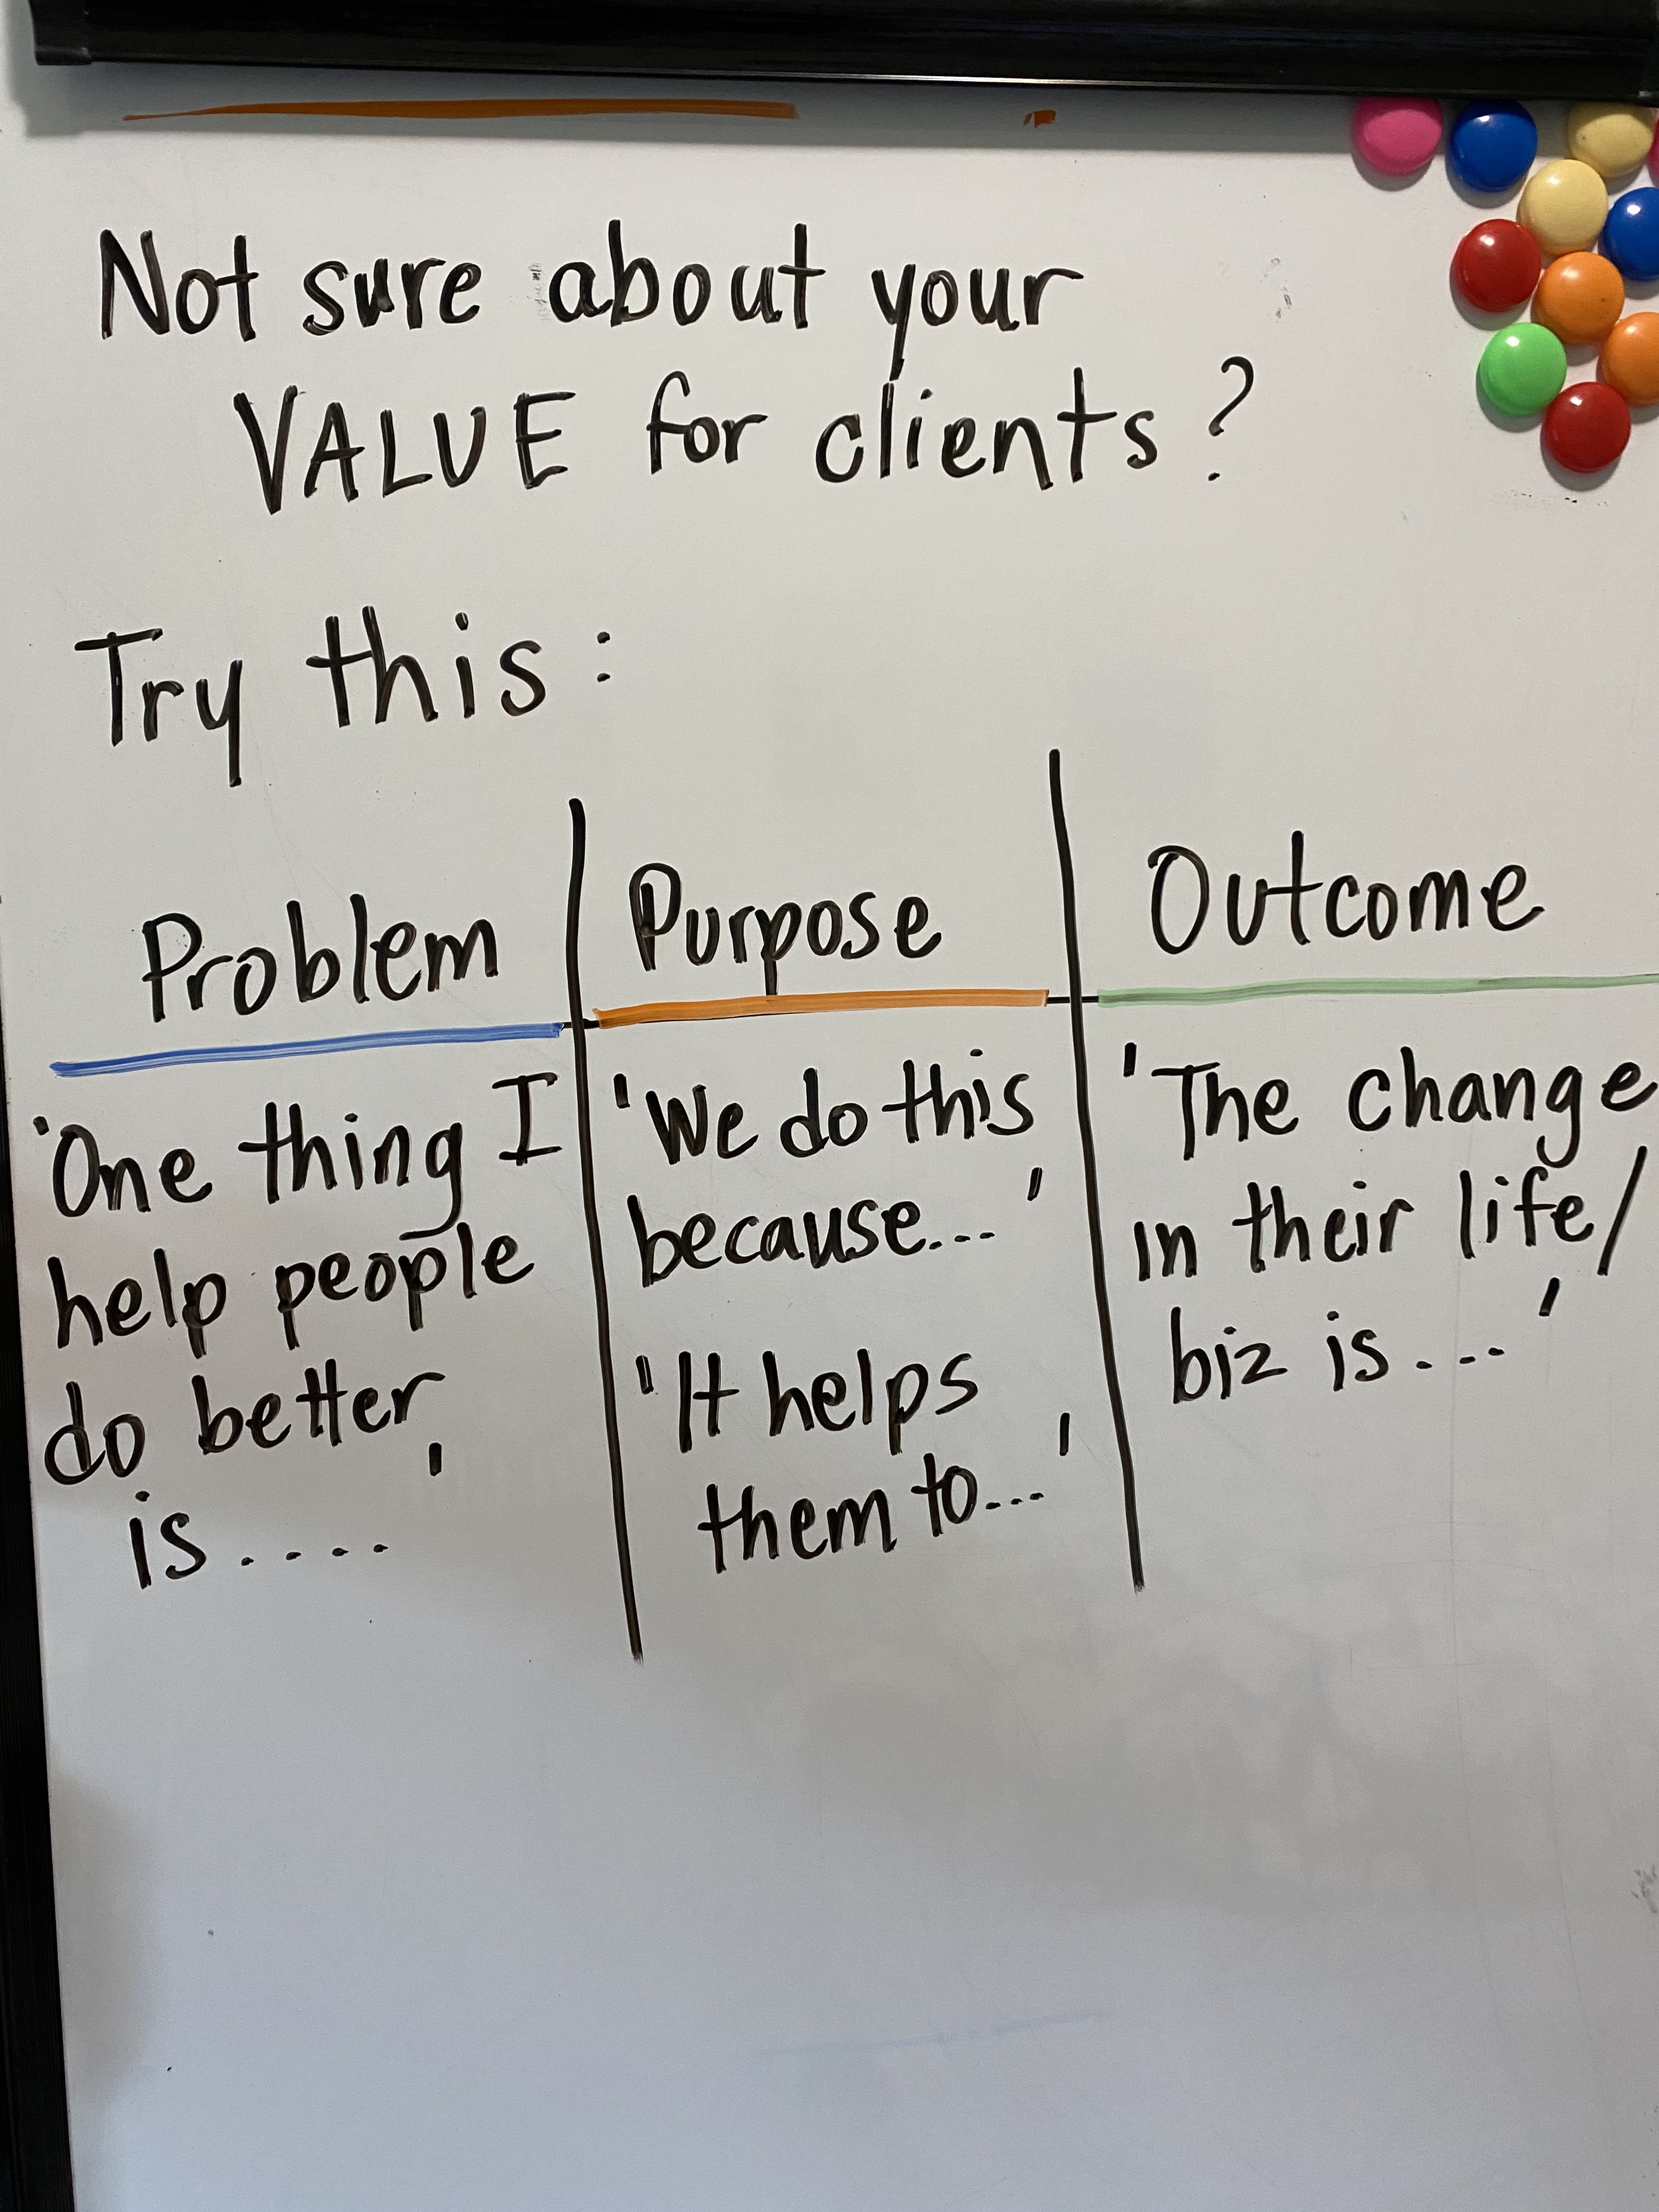 &#039;Not sure about your value for clients?&#039; chart with columns for Problem/Purpose/Outcome